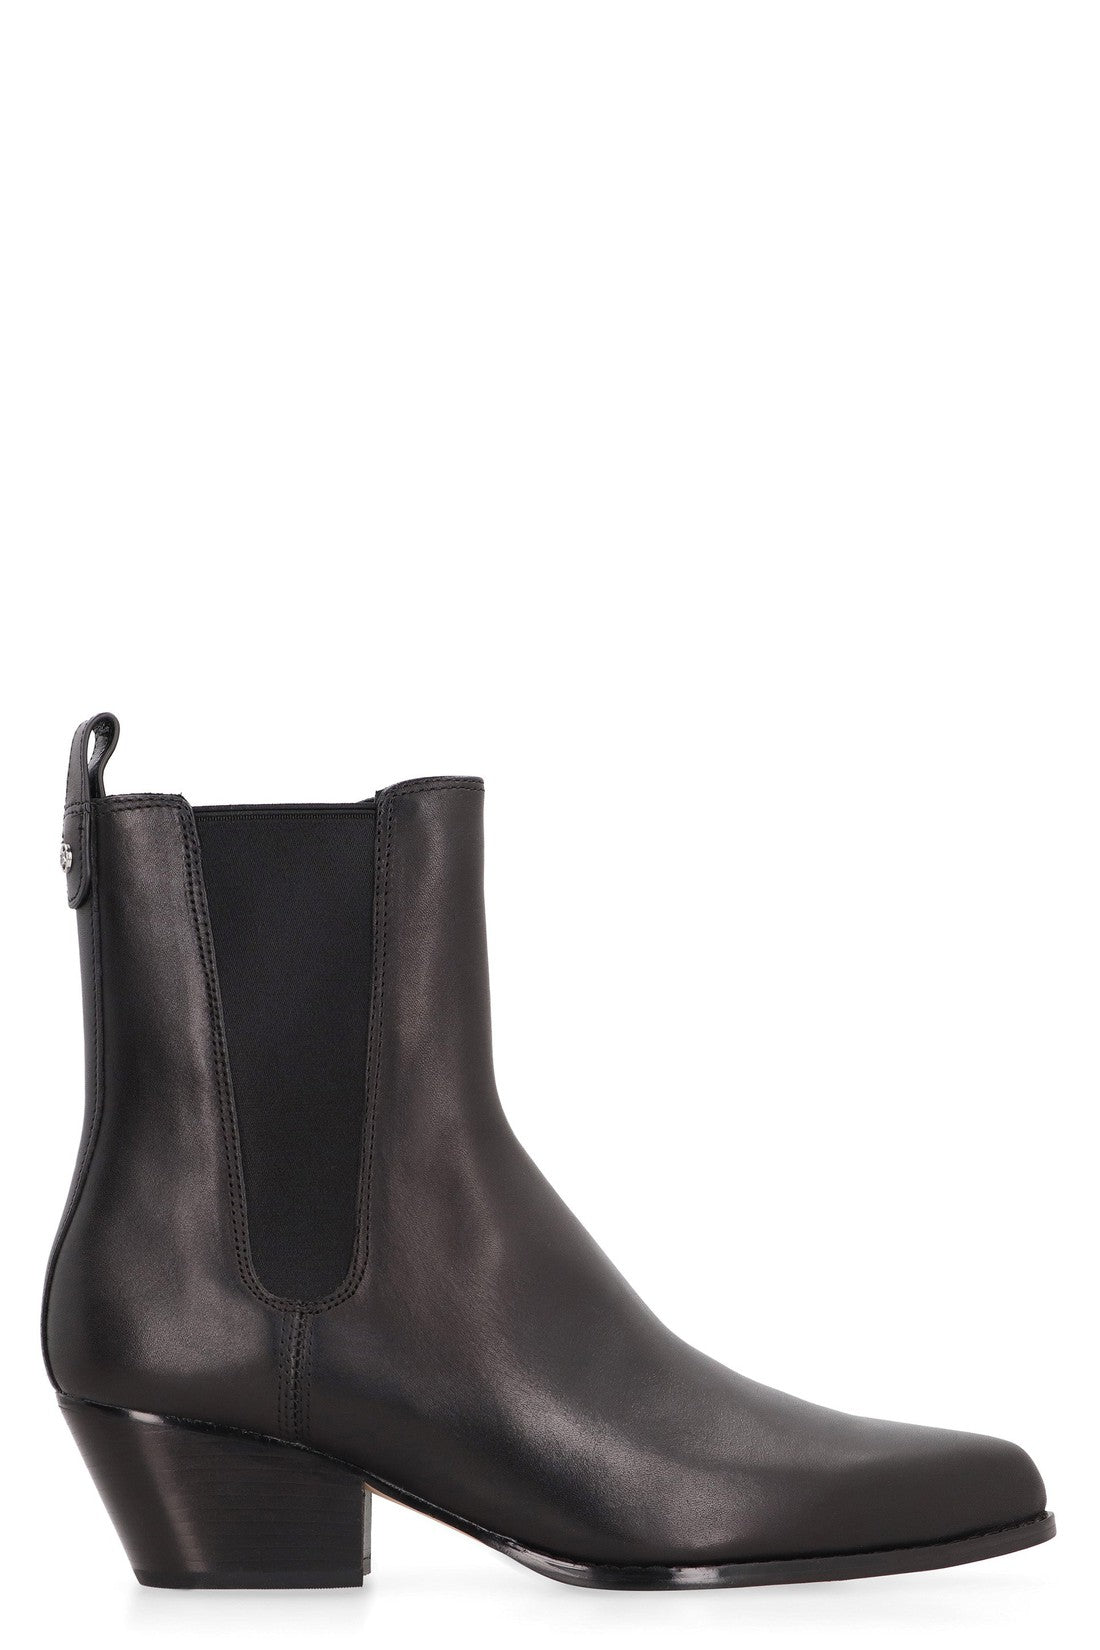 MICHAEL MICHAEL KORS-OUTLET-SALE-Kinlee leather ankle boots-ARCHIVIST